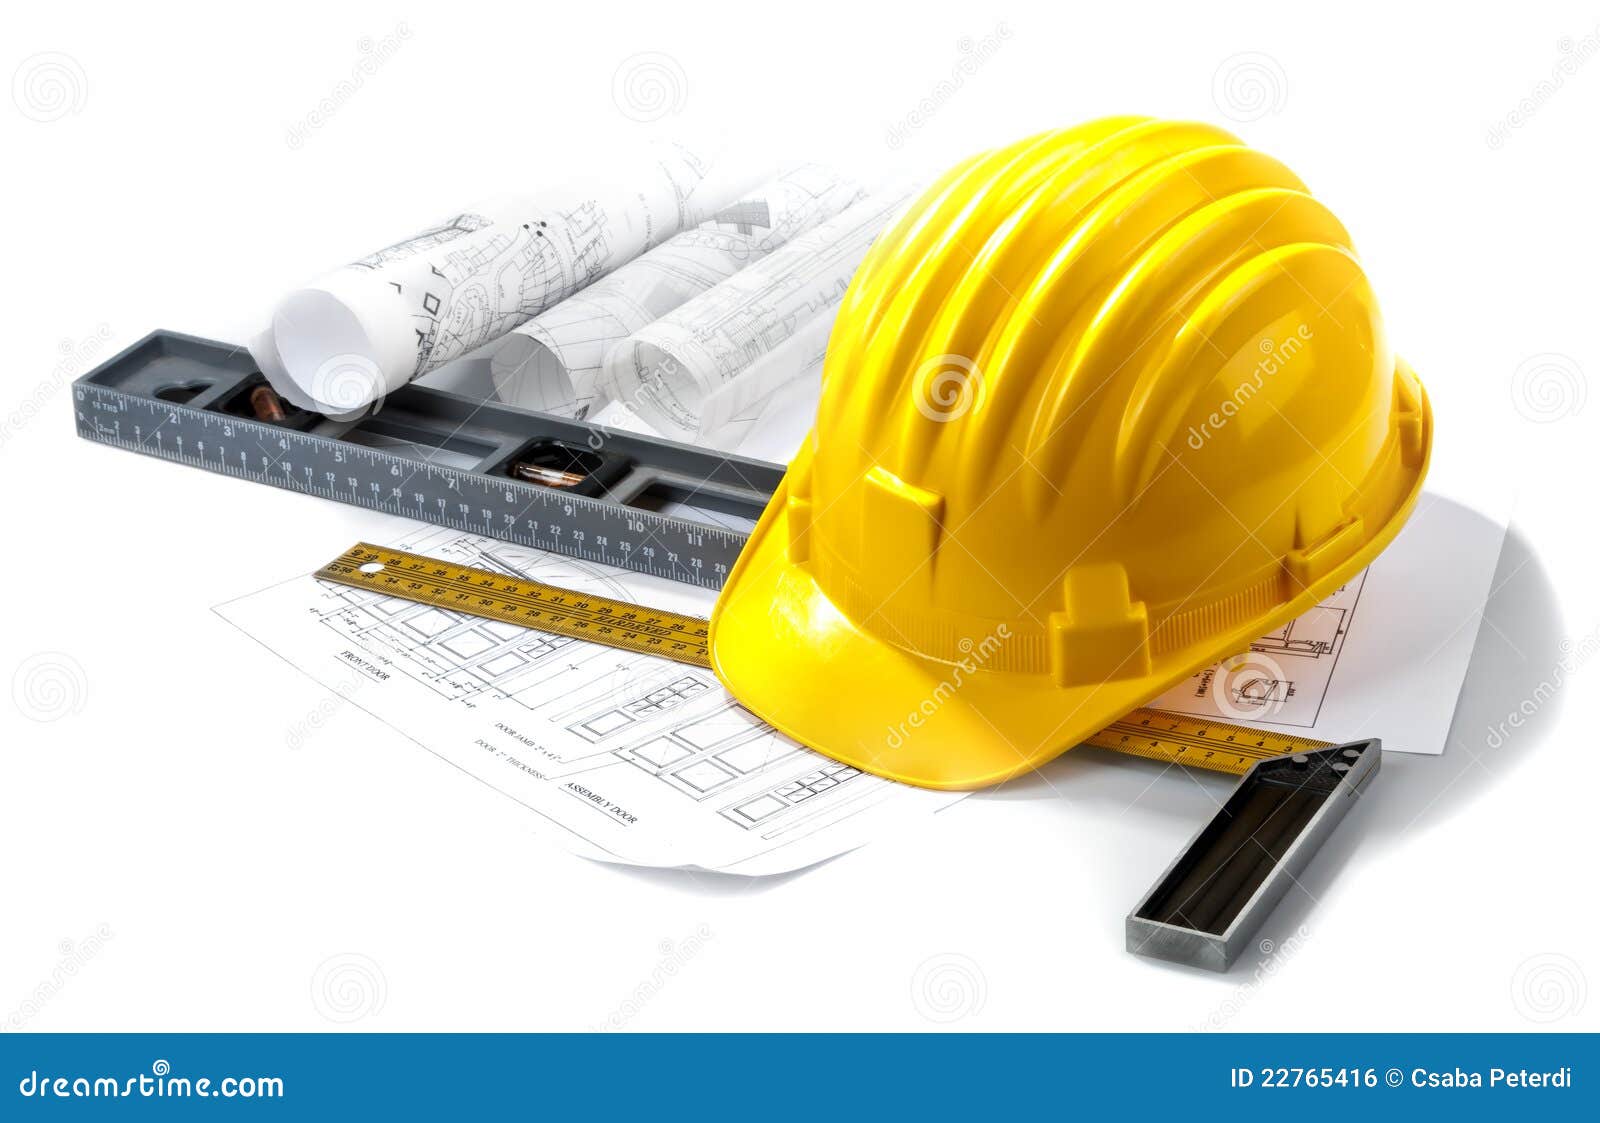  hard hat with blueprints and rulers